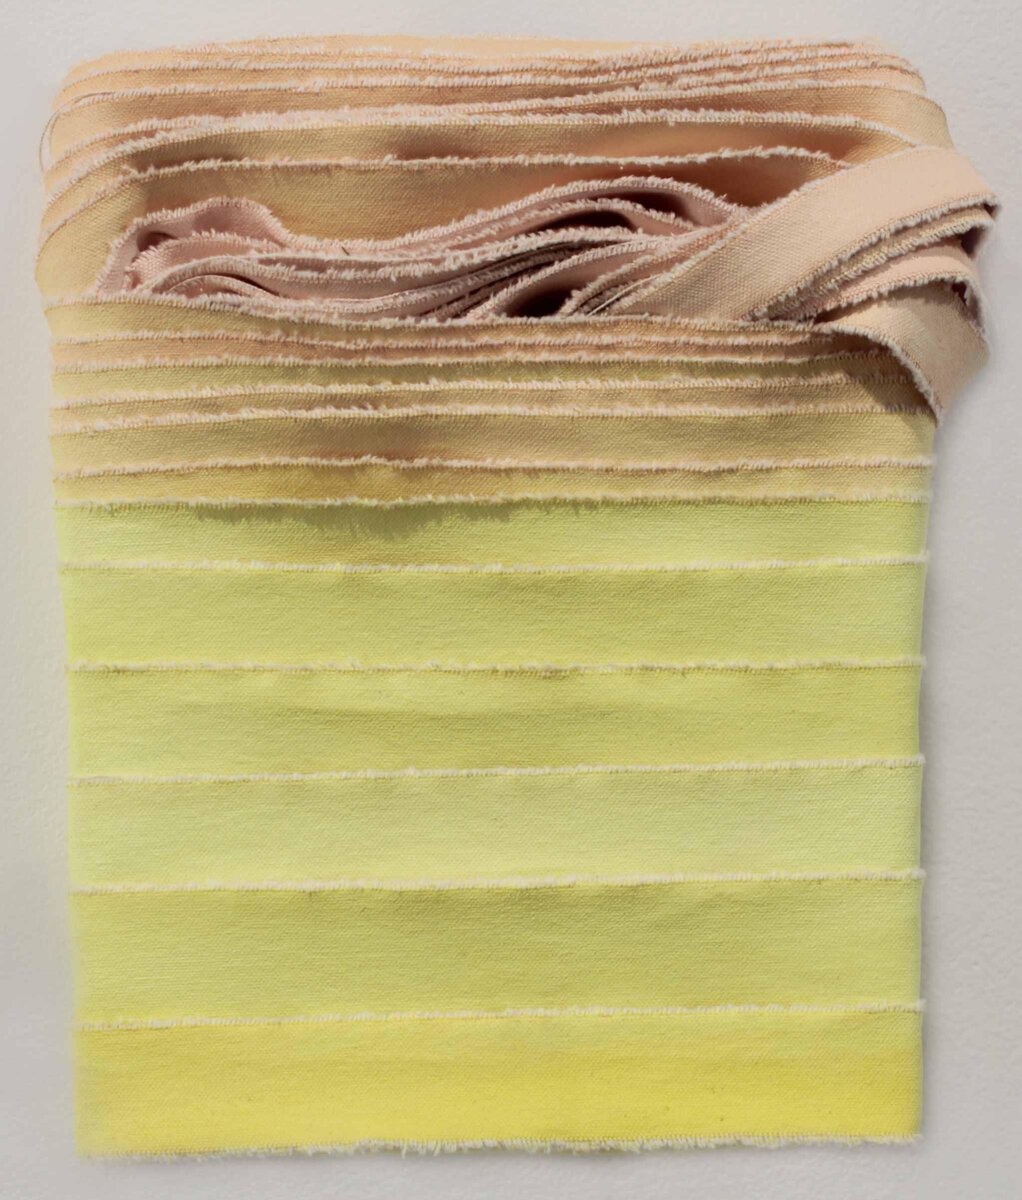 Jean Alexander Frater; Salmon to Yellow; 2016